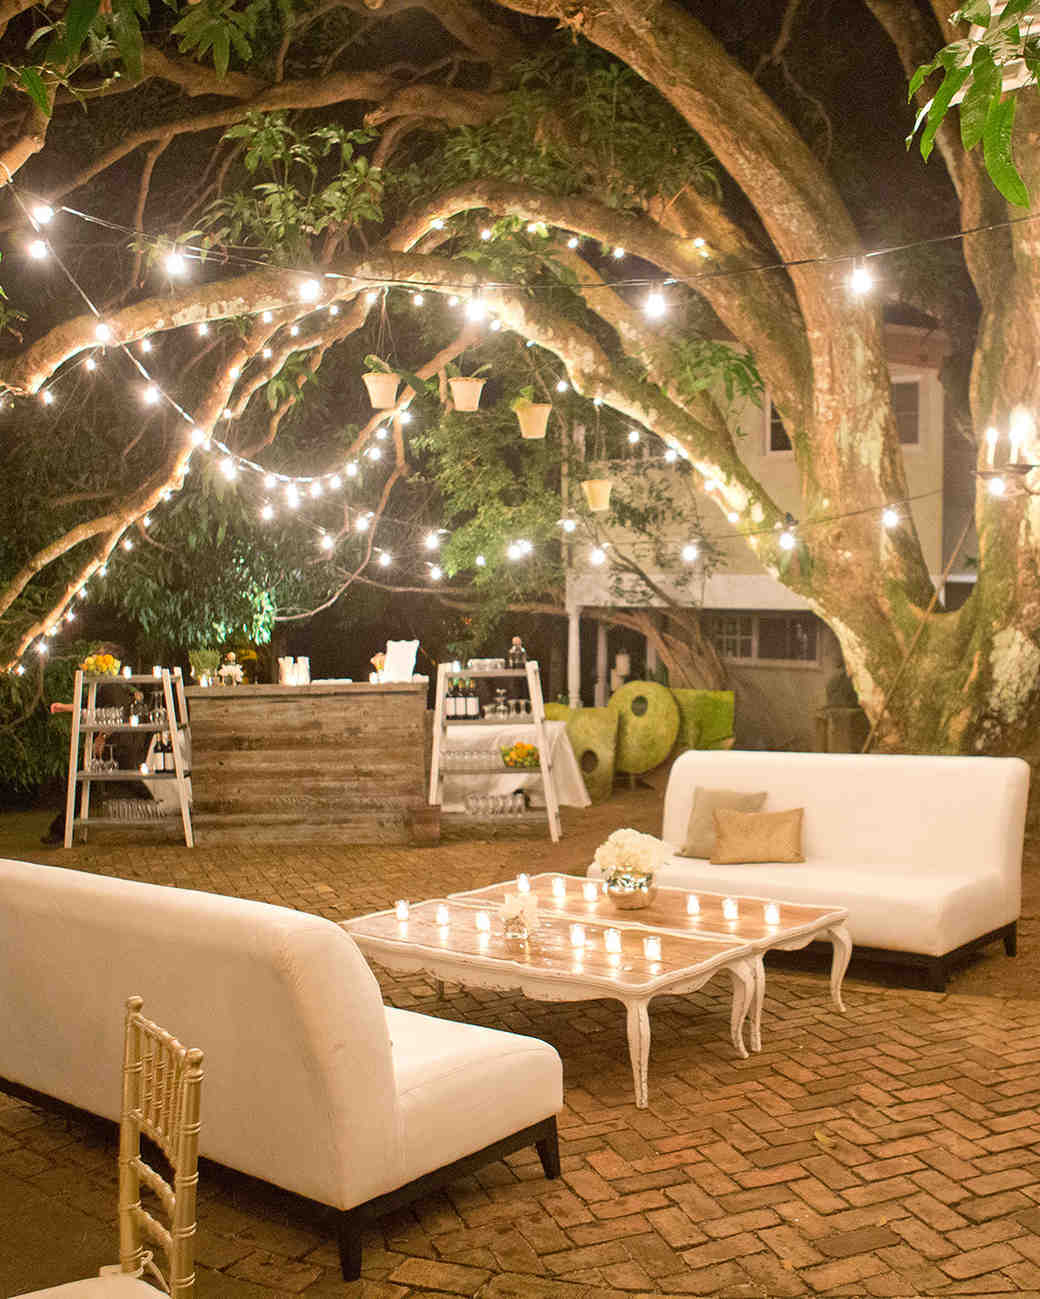 20 Unique Reception Seating Ideas That Will Surprise and Delight Your ...